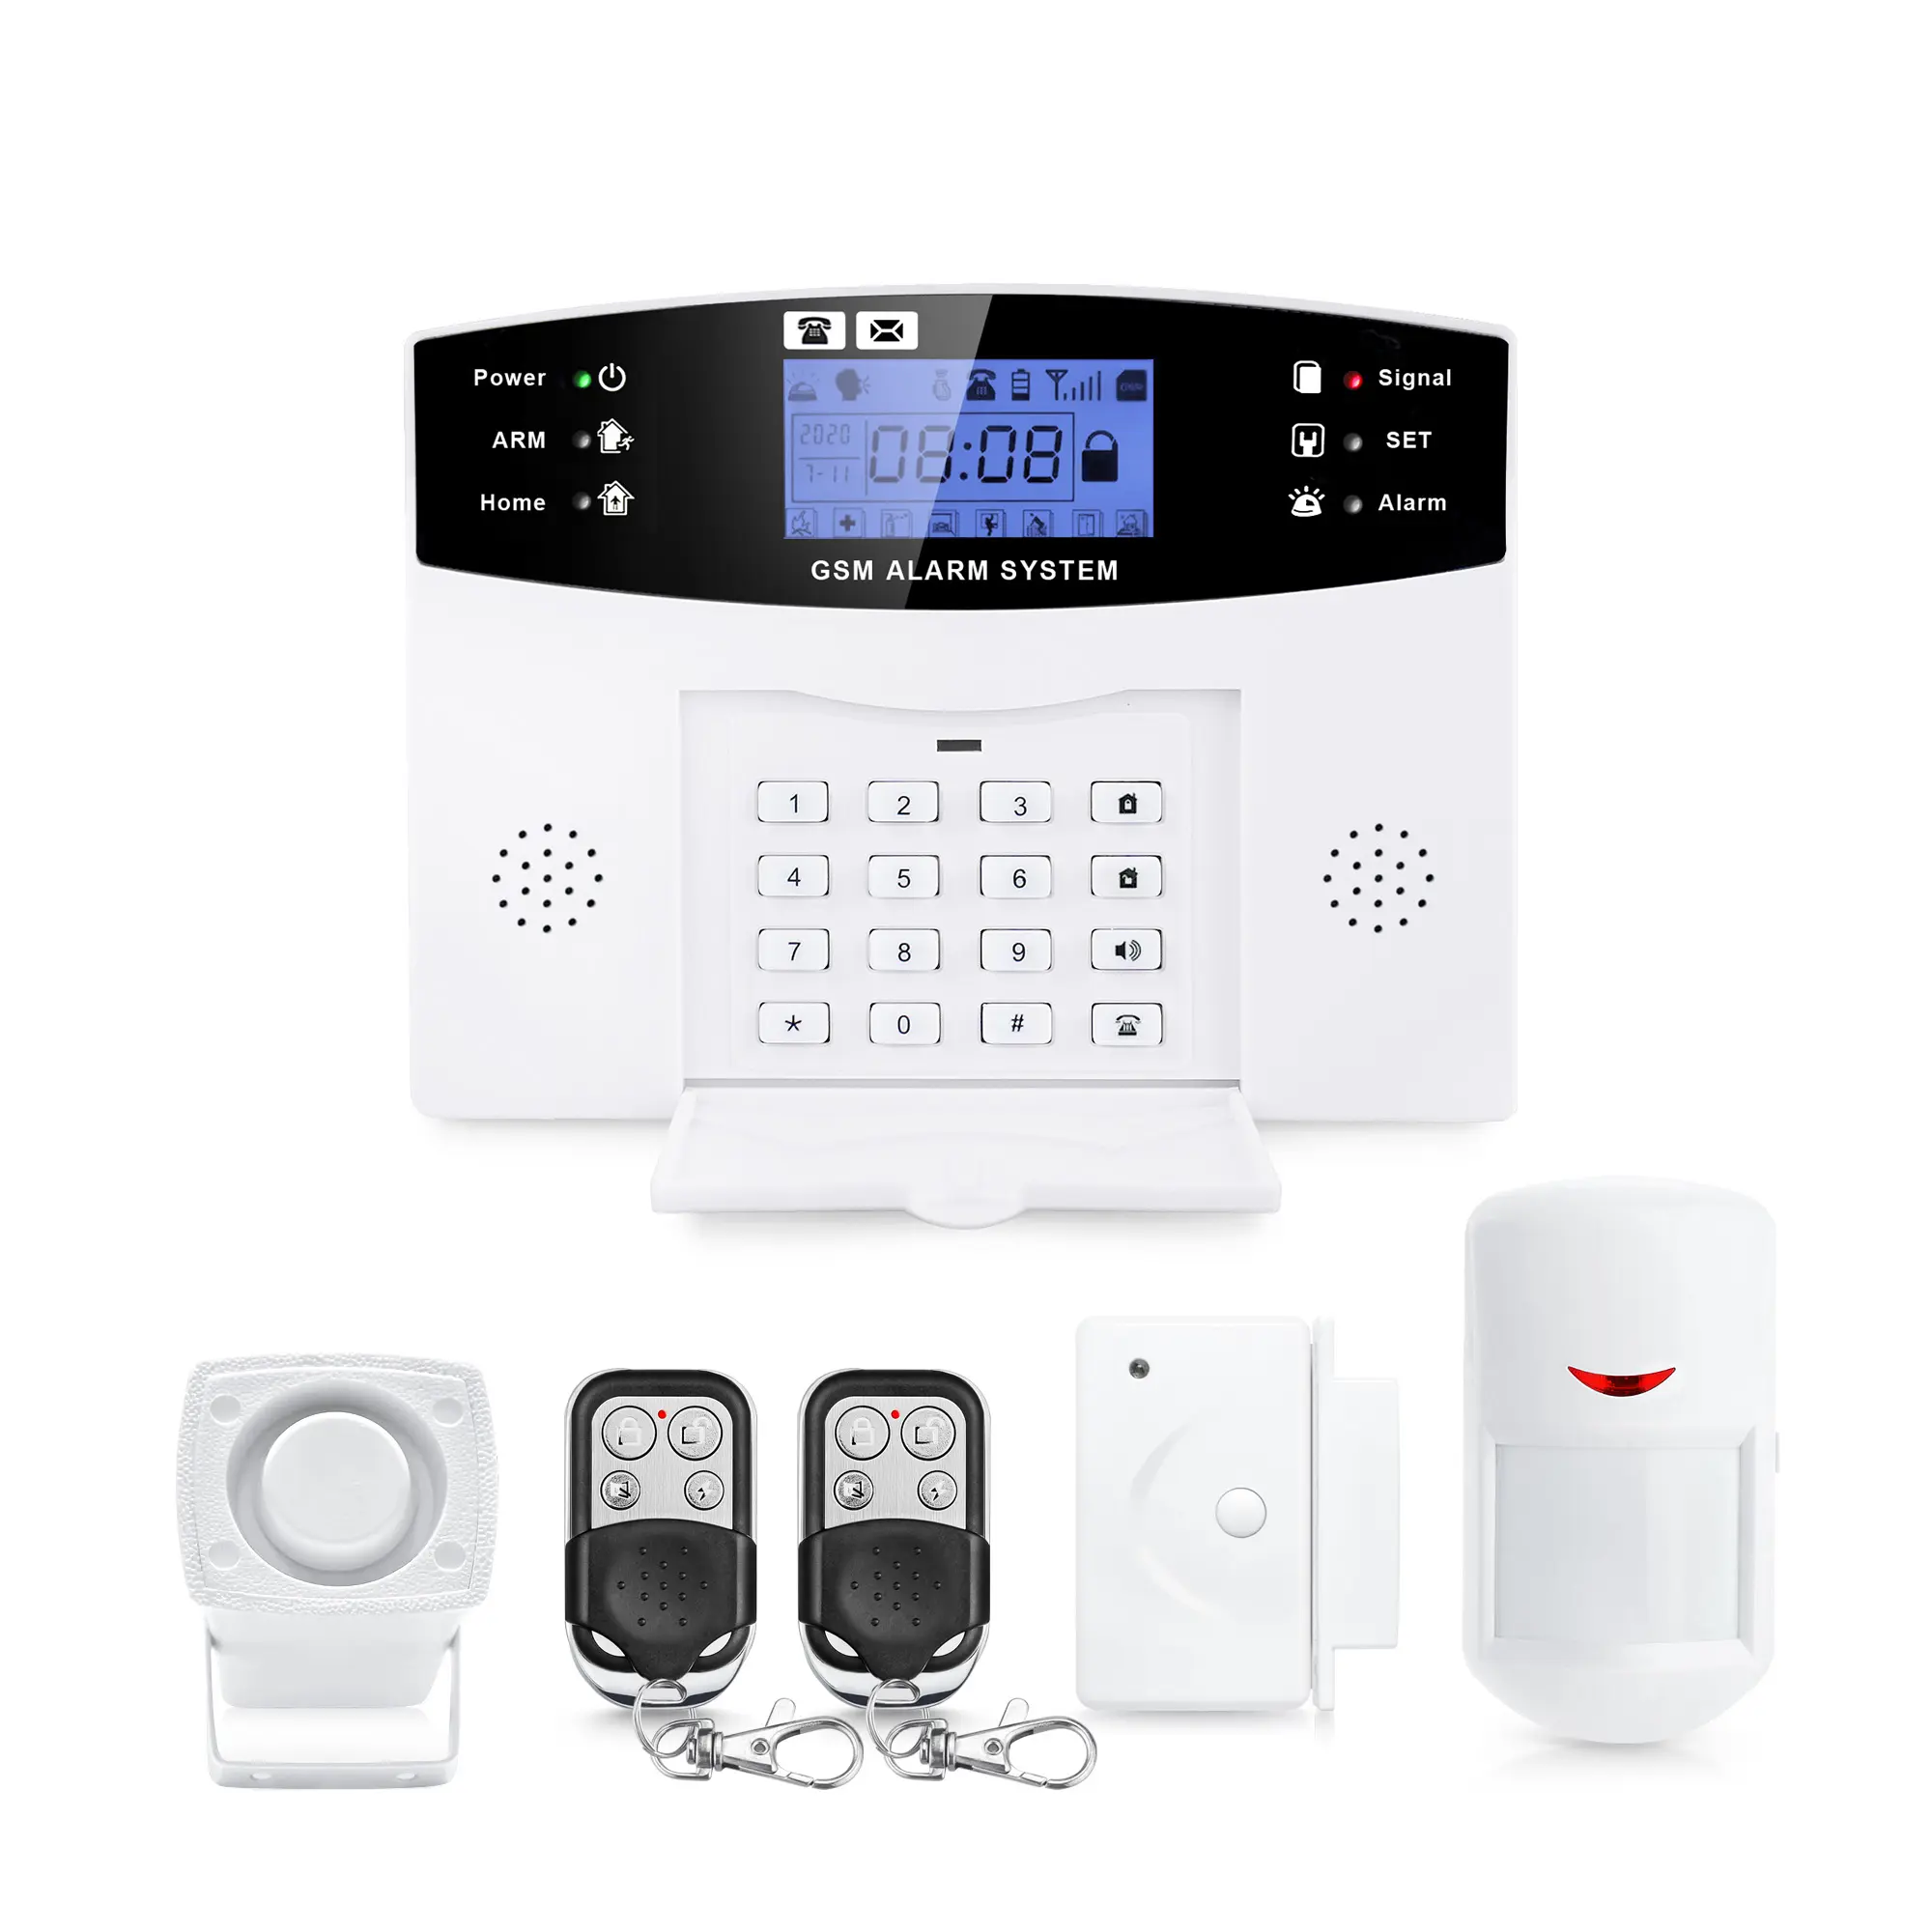 Bottom Wholesale Price Tuya 200 Wireless & 8 Wired Zones WiFi GSM Home Alarms System Kit With App Remote Control PST-PG500-TY